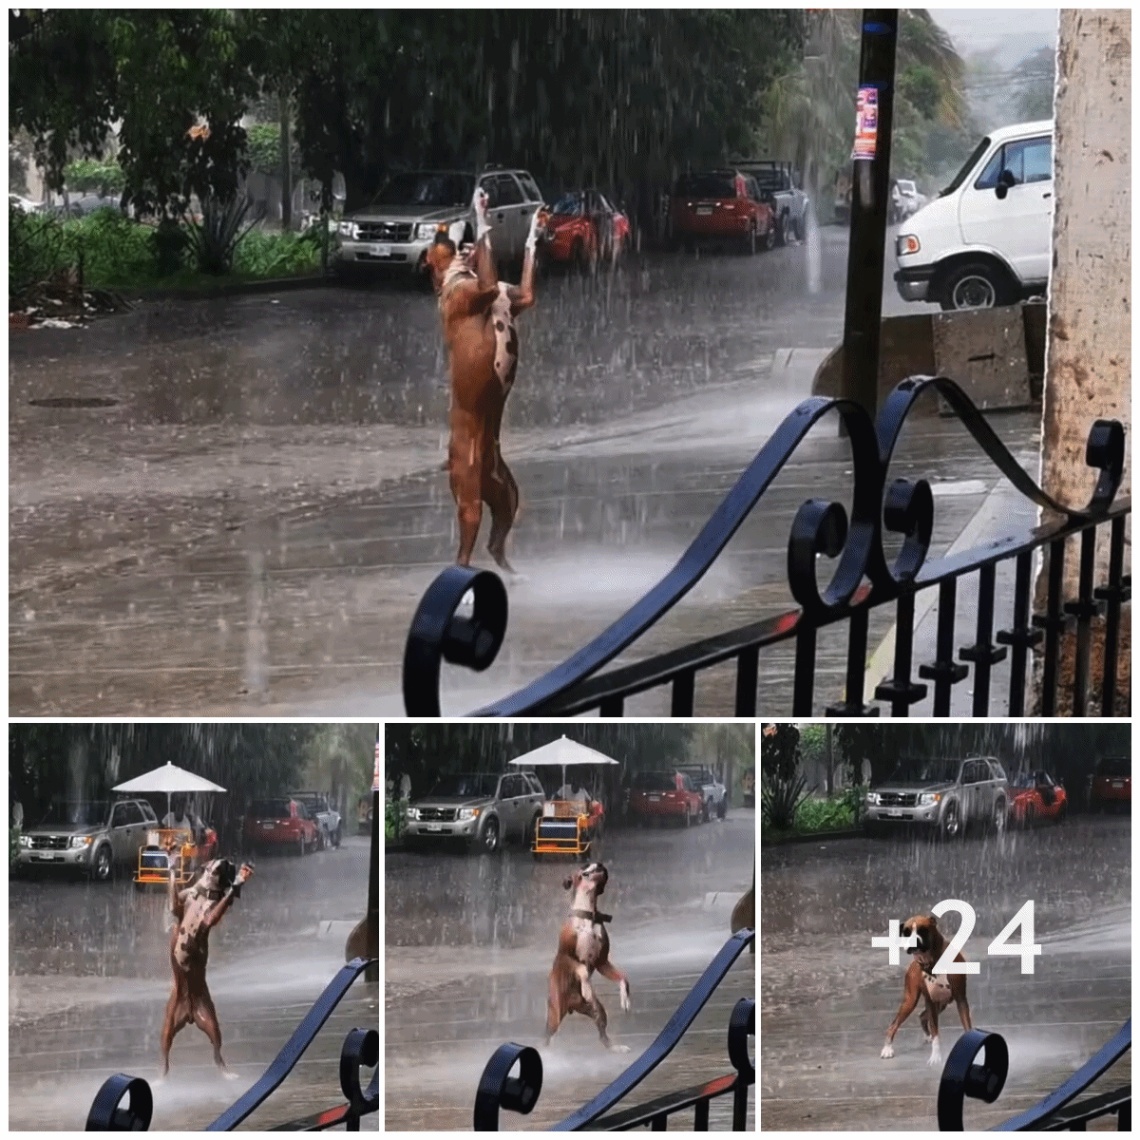 Rare moment: The image of a dog dancing in the rain, having fun happily attracts viewers and warms their hearts.